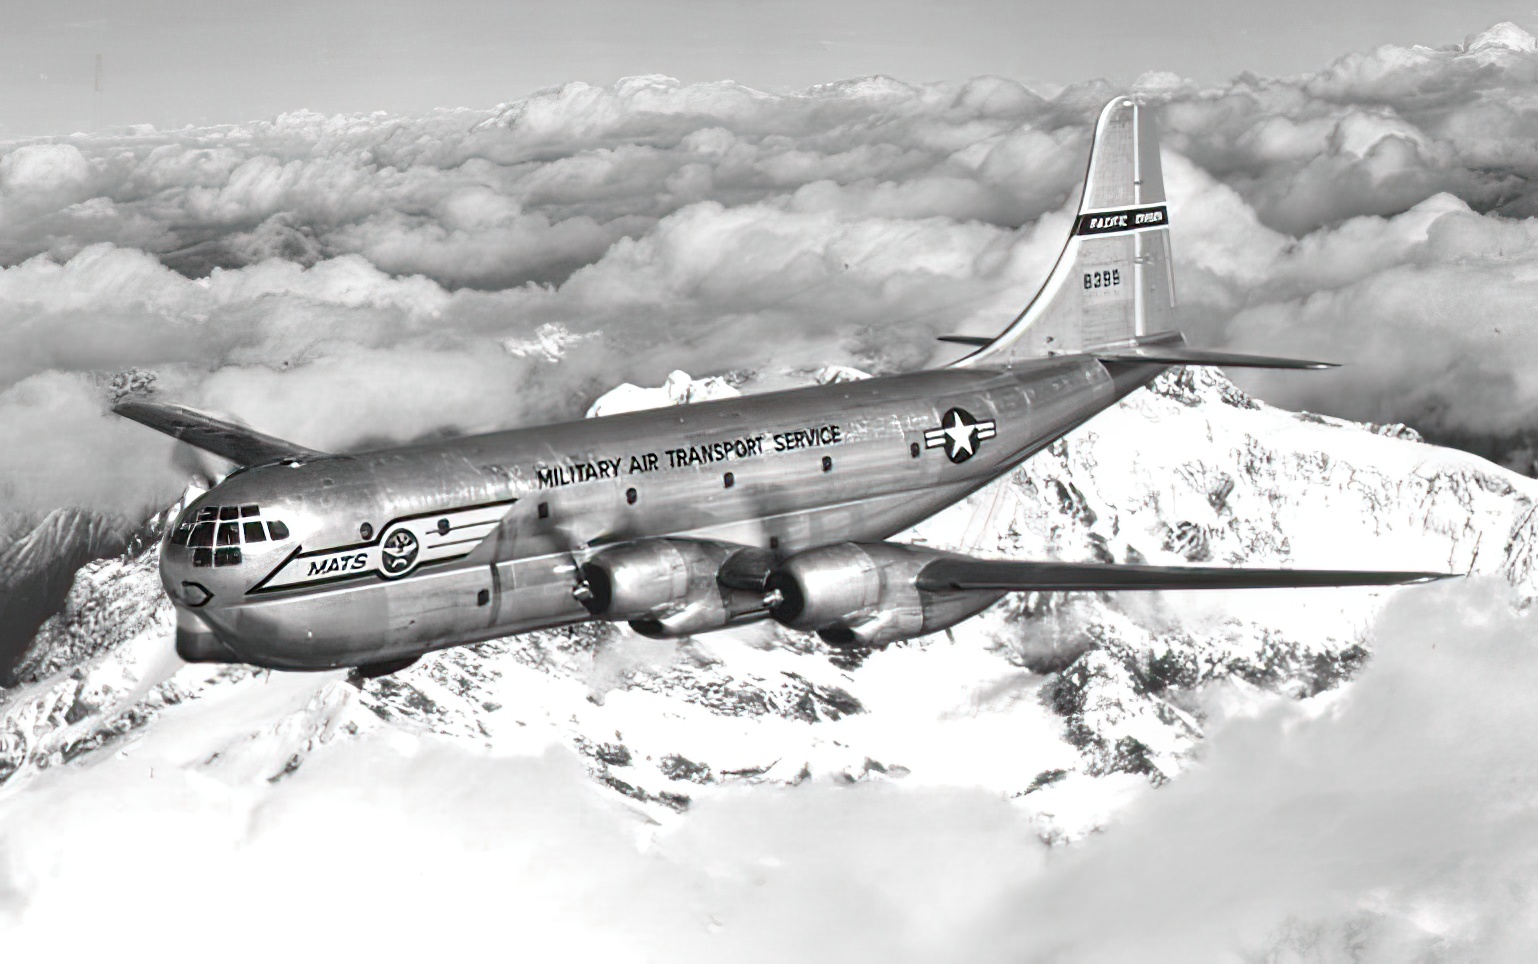 Boeing C-97A Stratofreighter (s/n 48-399) in Military Air Transport Service markings